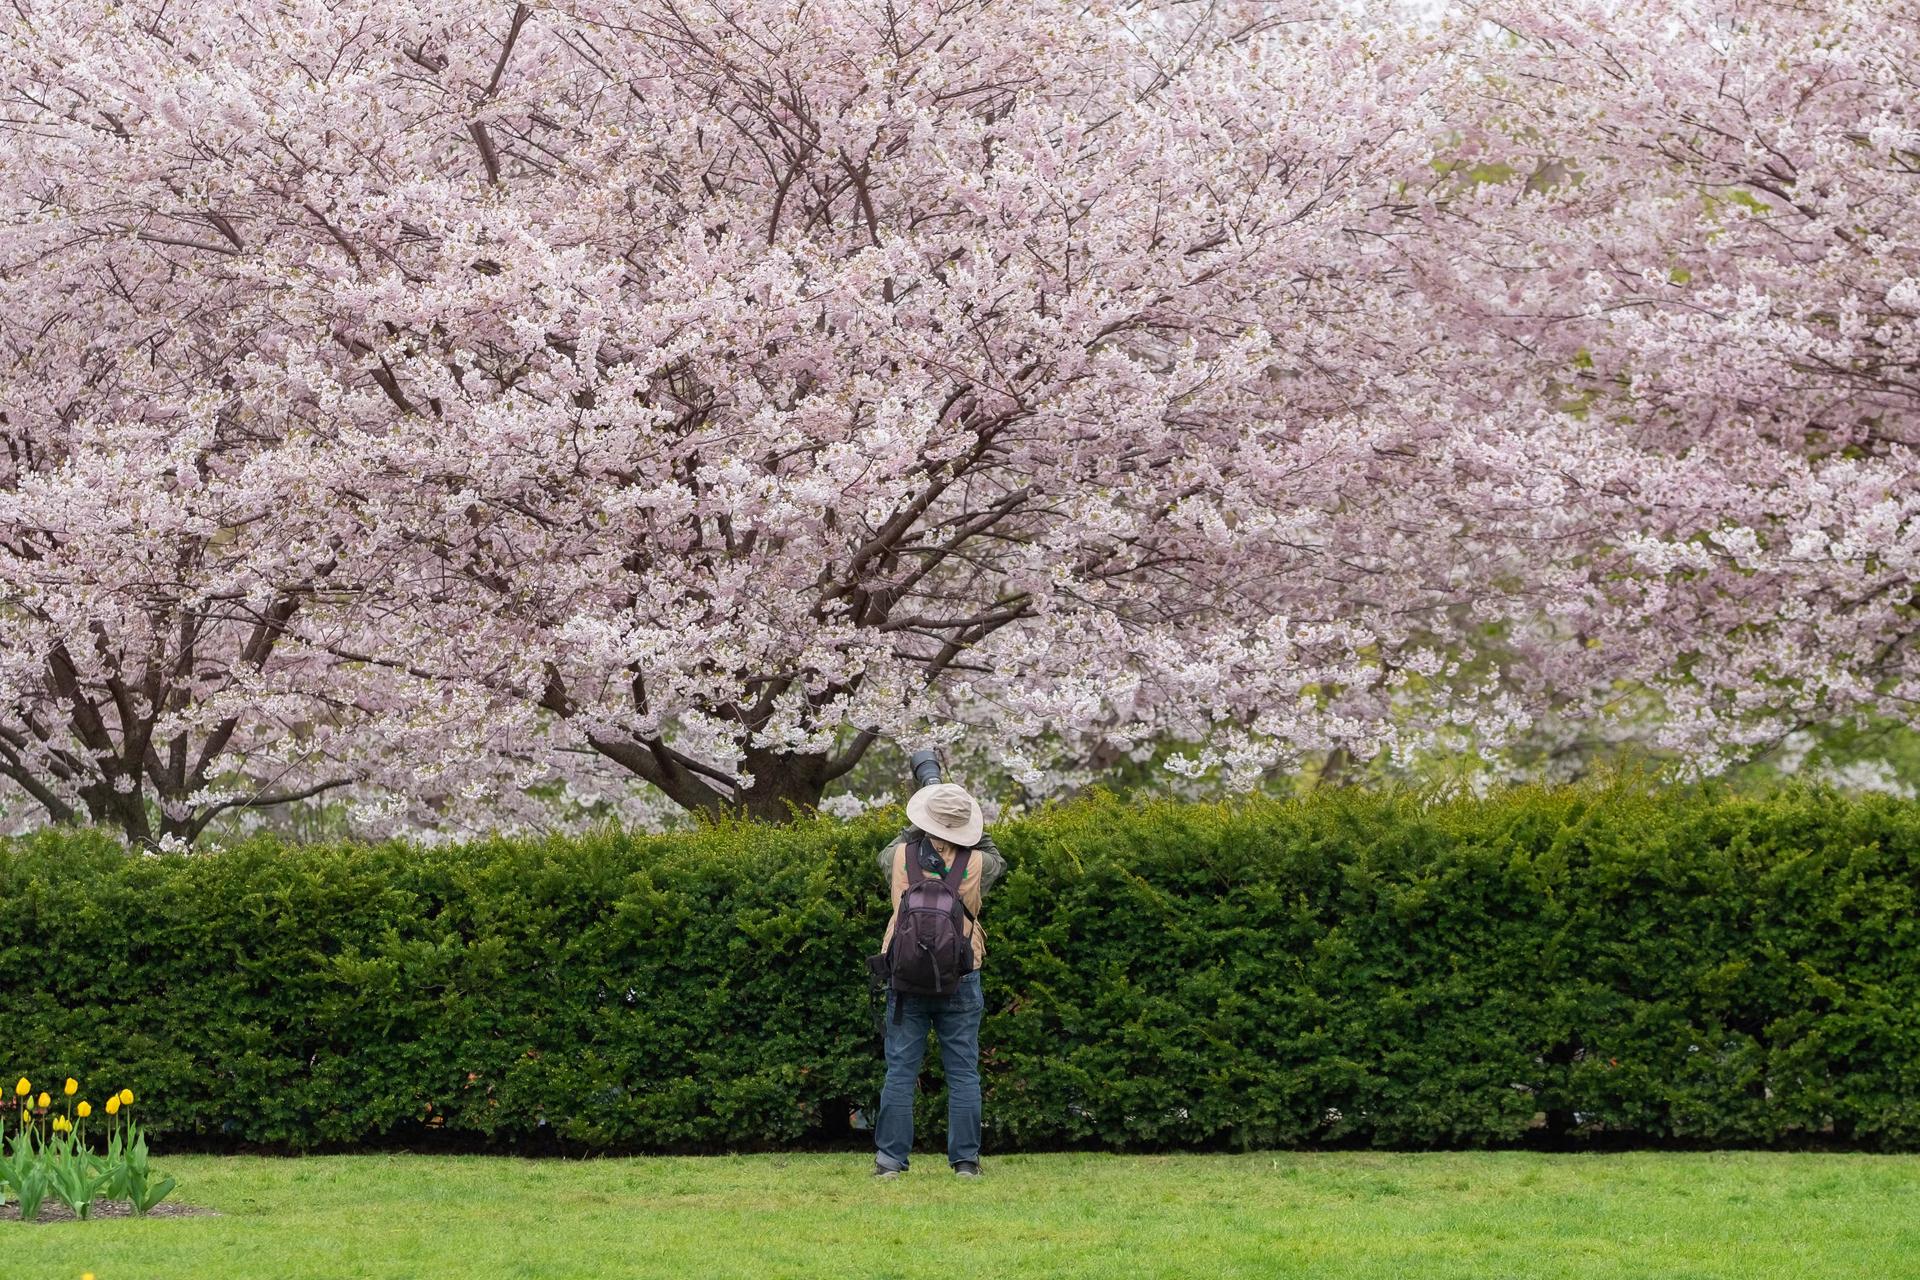 Photographer taking pictures of cherry blossoms in full bloom with white and pink flowers in High Park